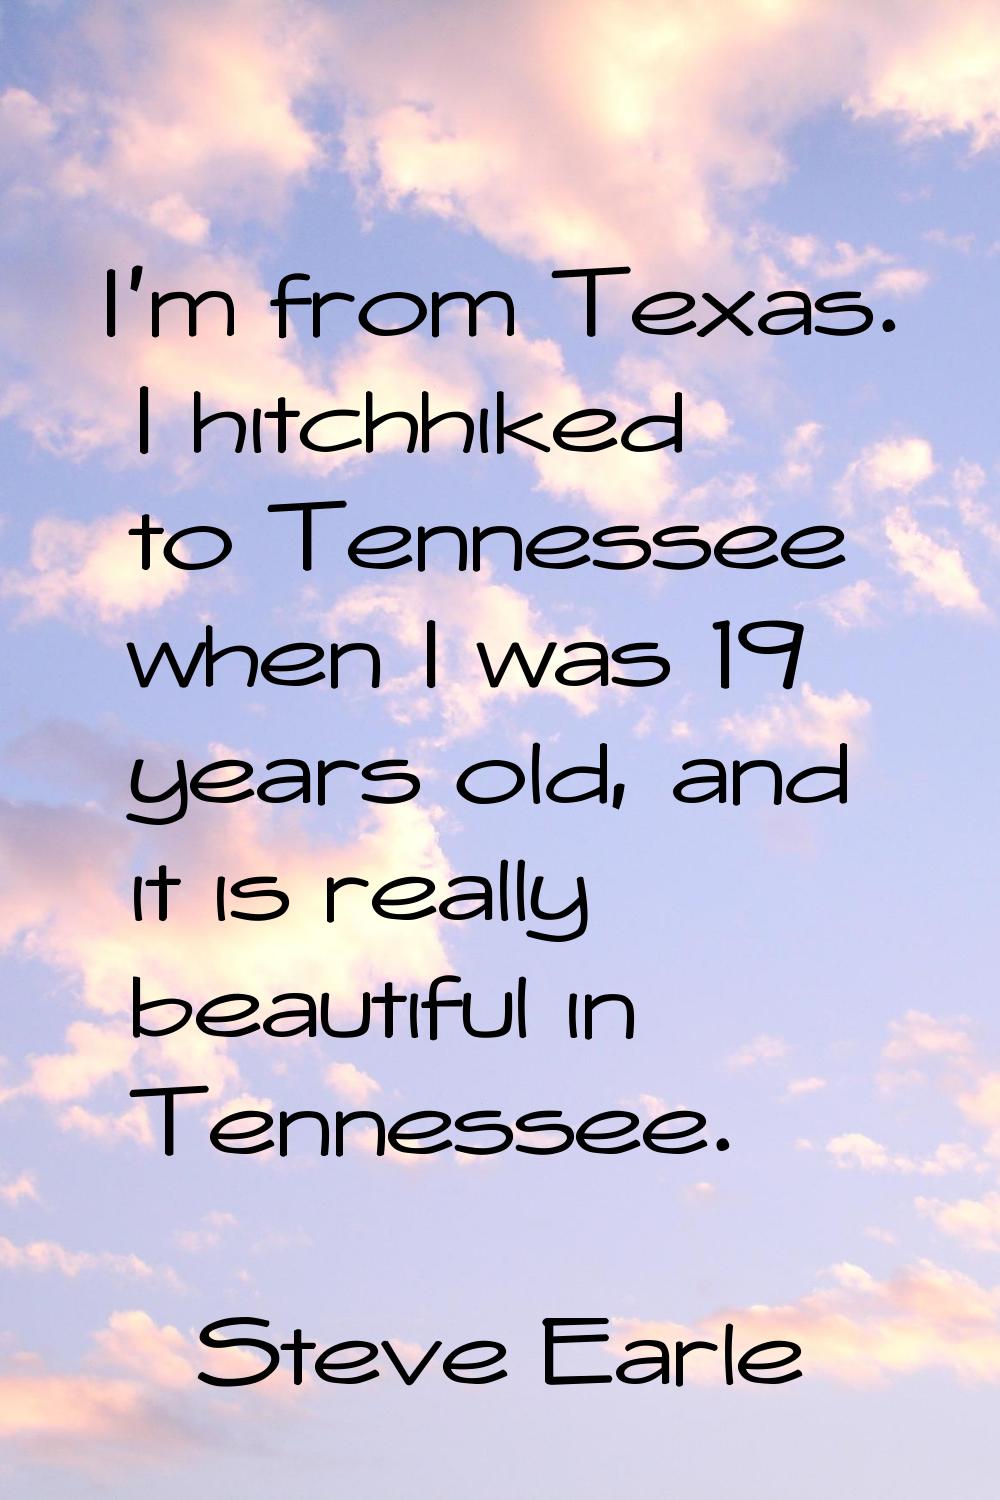 I'm from Texas. I hitchhiked to Tennessee when I was 19 years old, and it is really beautiful in Te